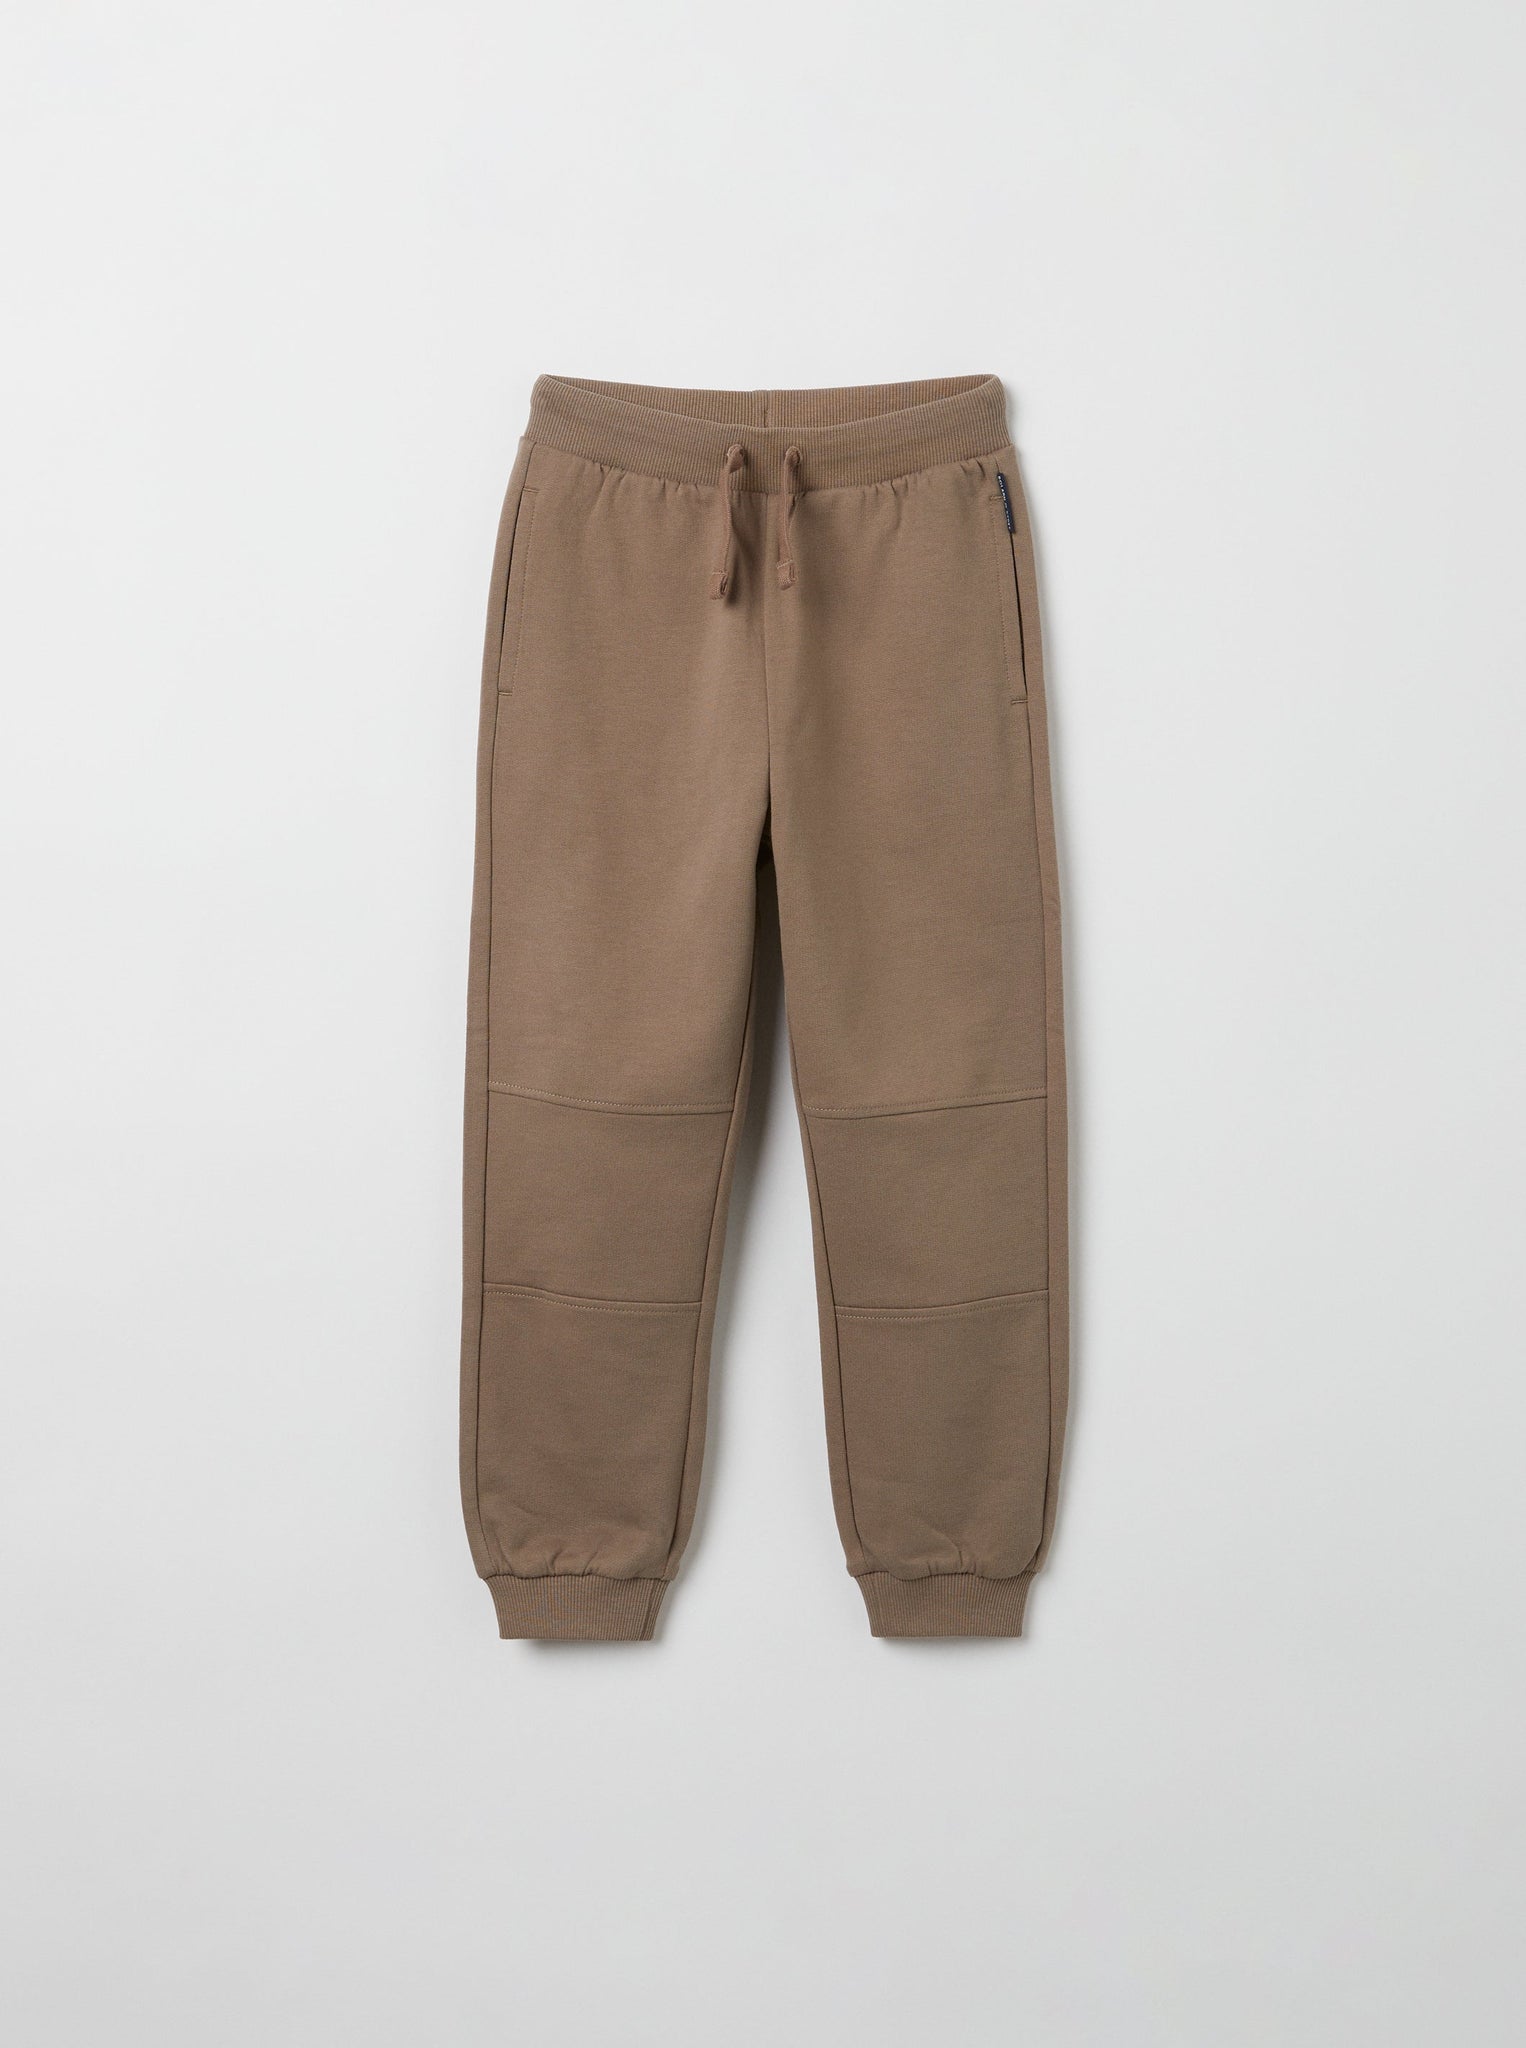 Organic Cotton Brown Kids Joggers from the Polarn O. Pyret kidswear collection. Clothes made using sustainably sourced materials.